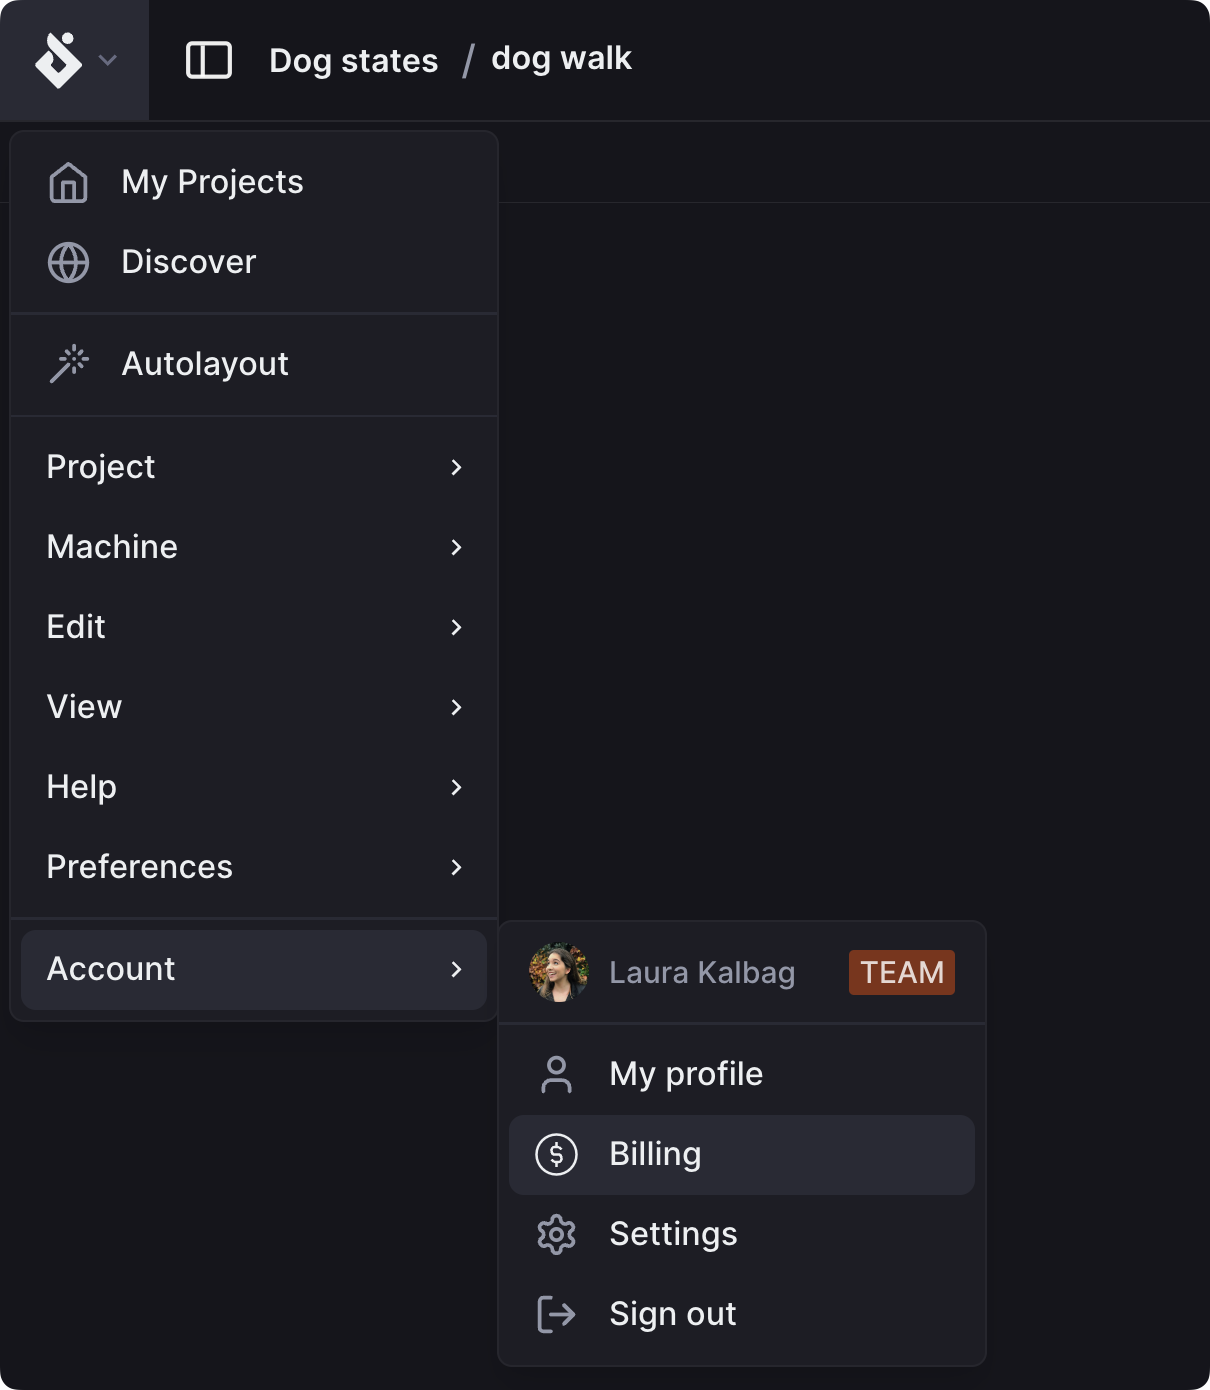 Billing option in the user account menu in the Stately Studio header.